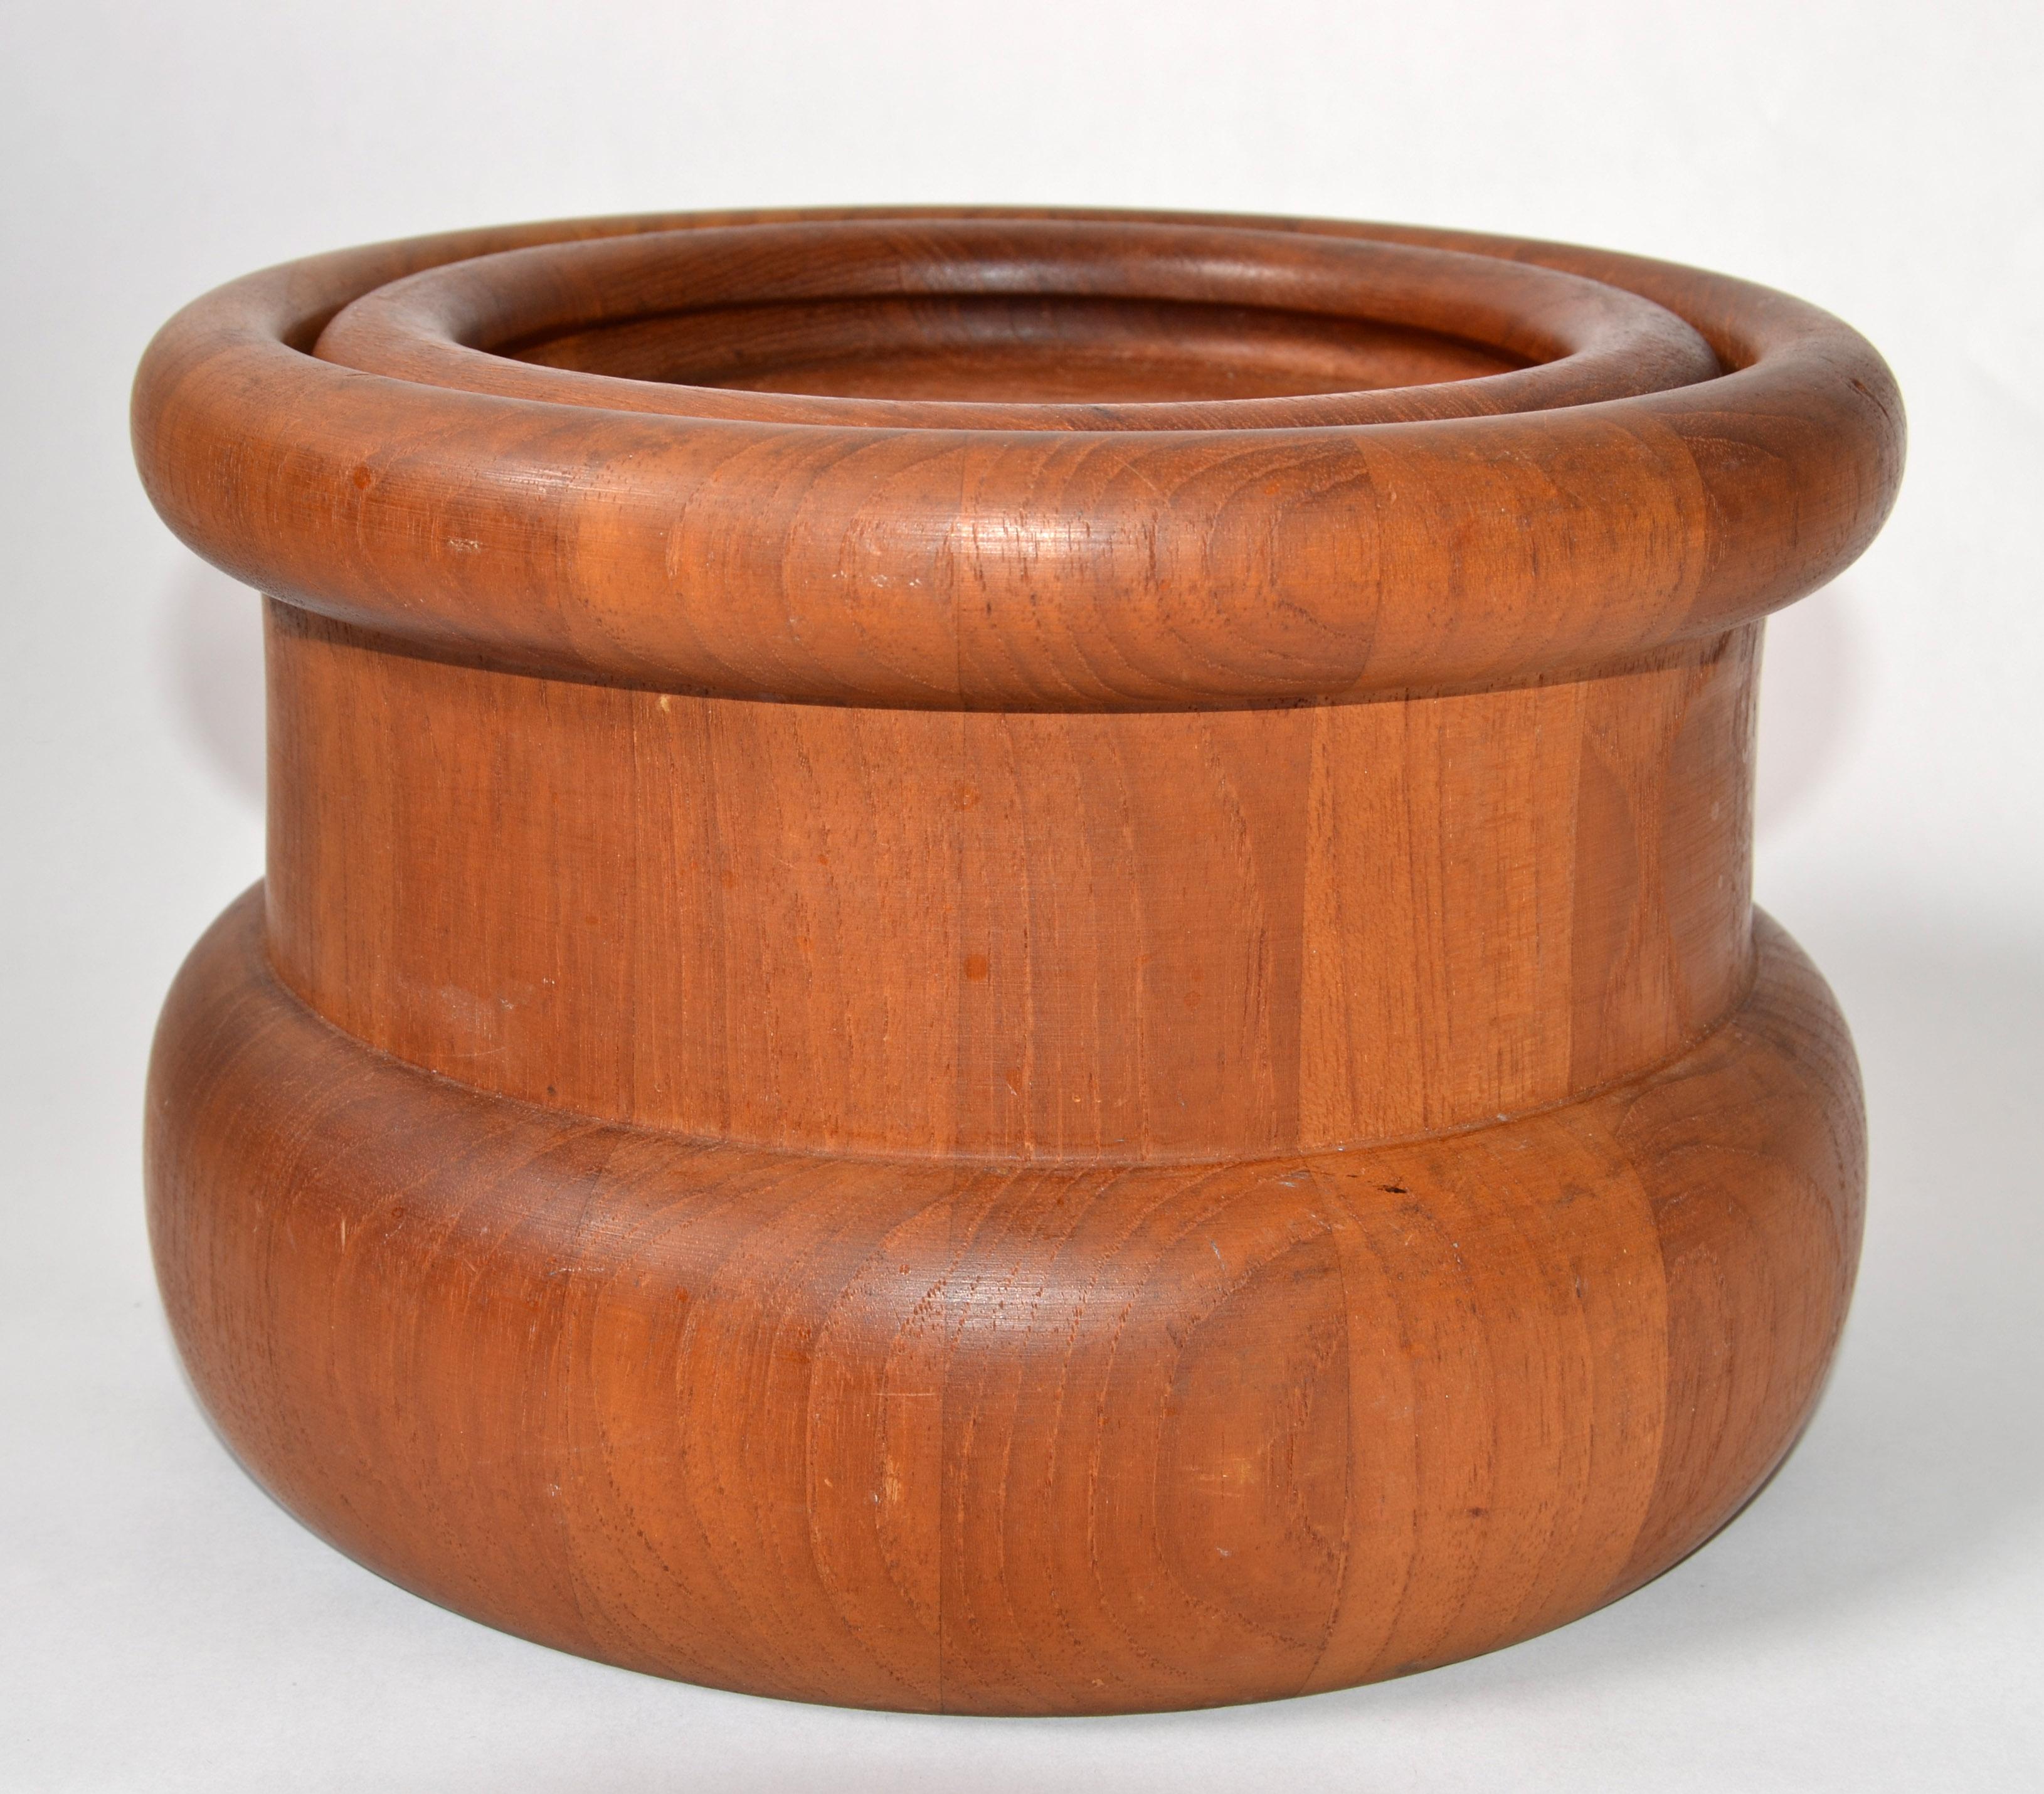 Danish modern handmade round teak lidded ice bucket made by Nissen in Denmark circa late 1960s. 
Stunner done the rolled wood Top and the interior is lined with black plastic to keep the ice cubes fresh for a long time.
Branded with the Nissen